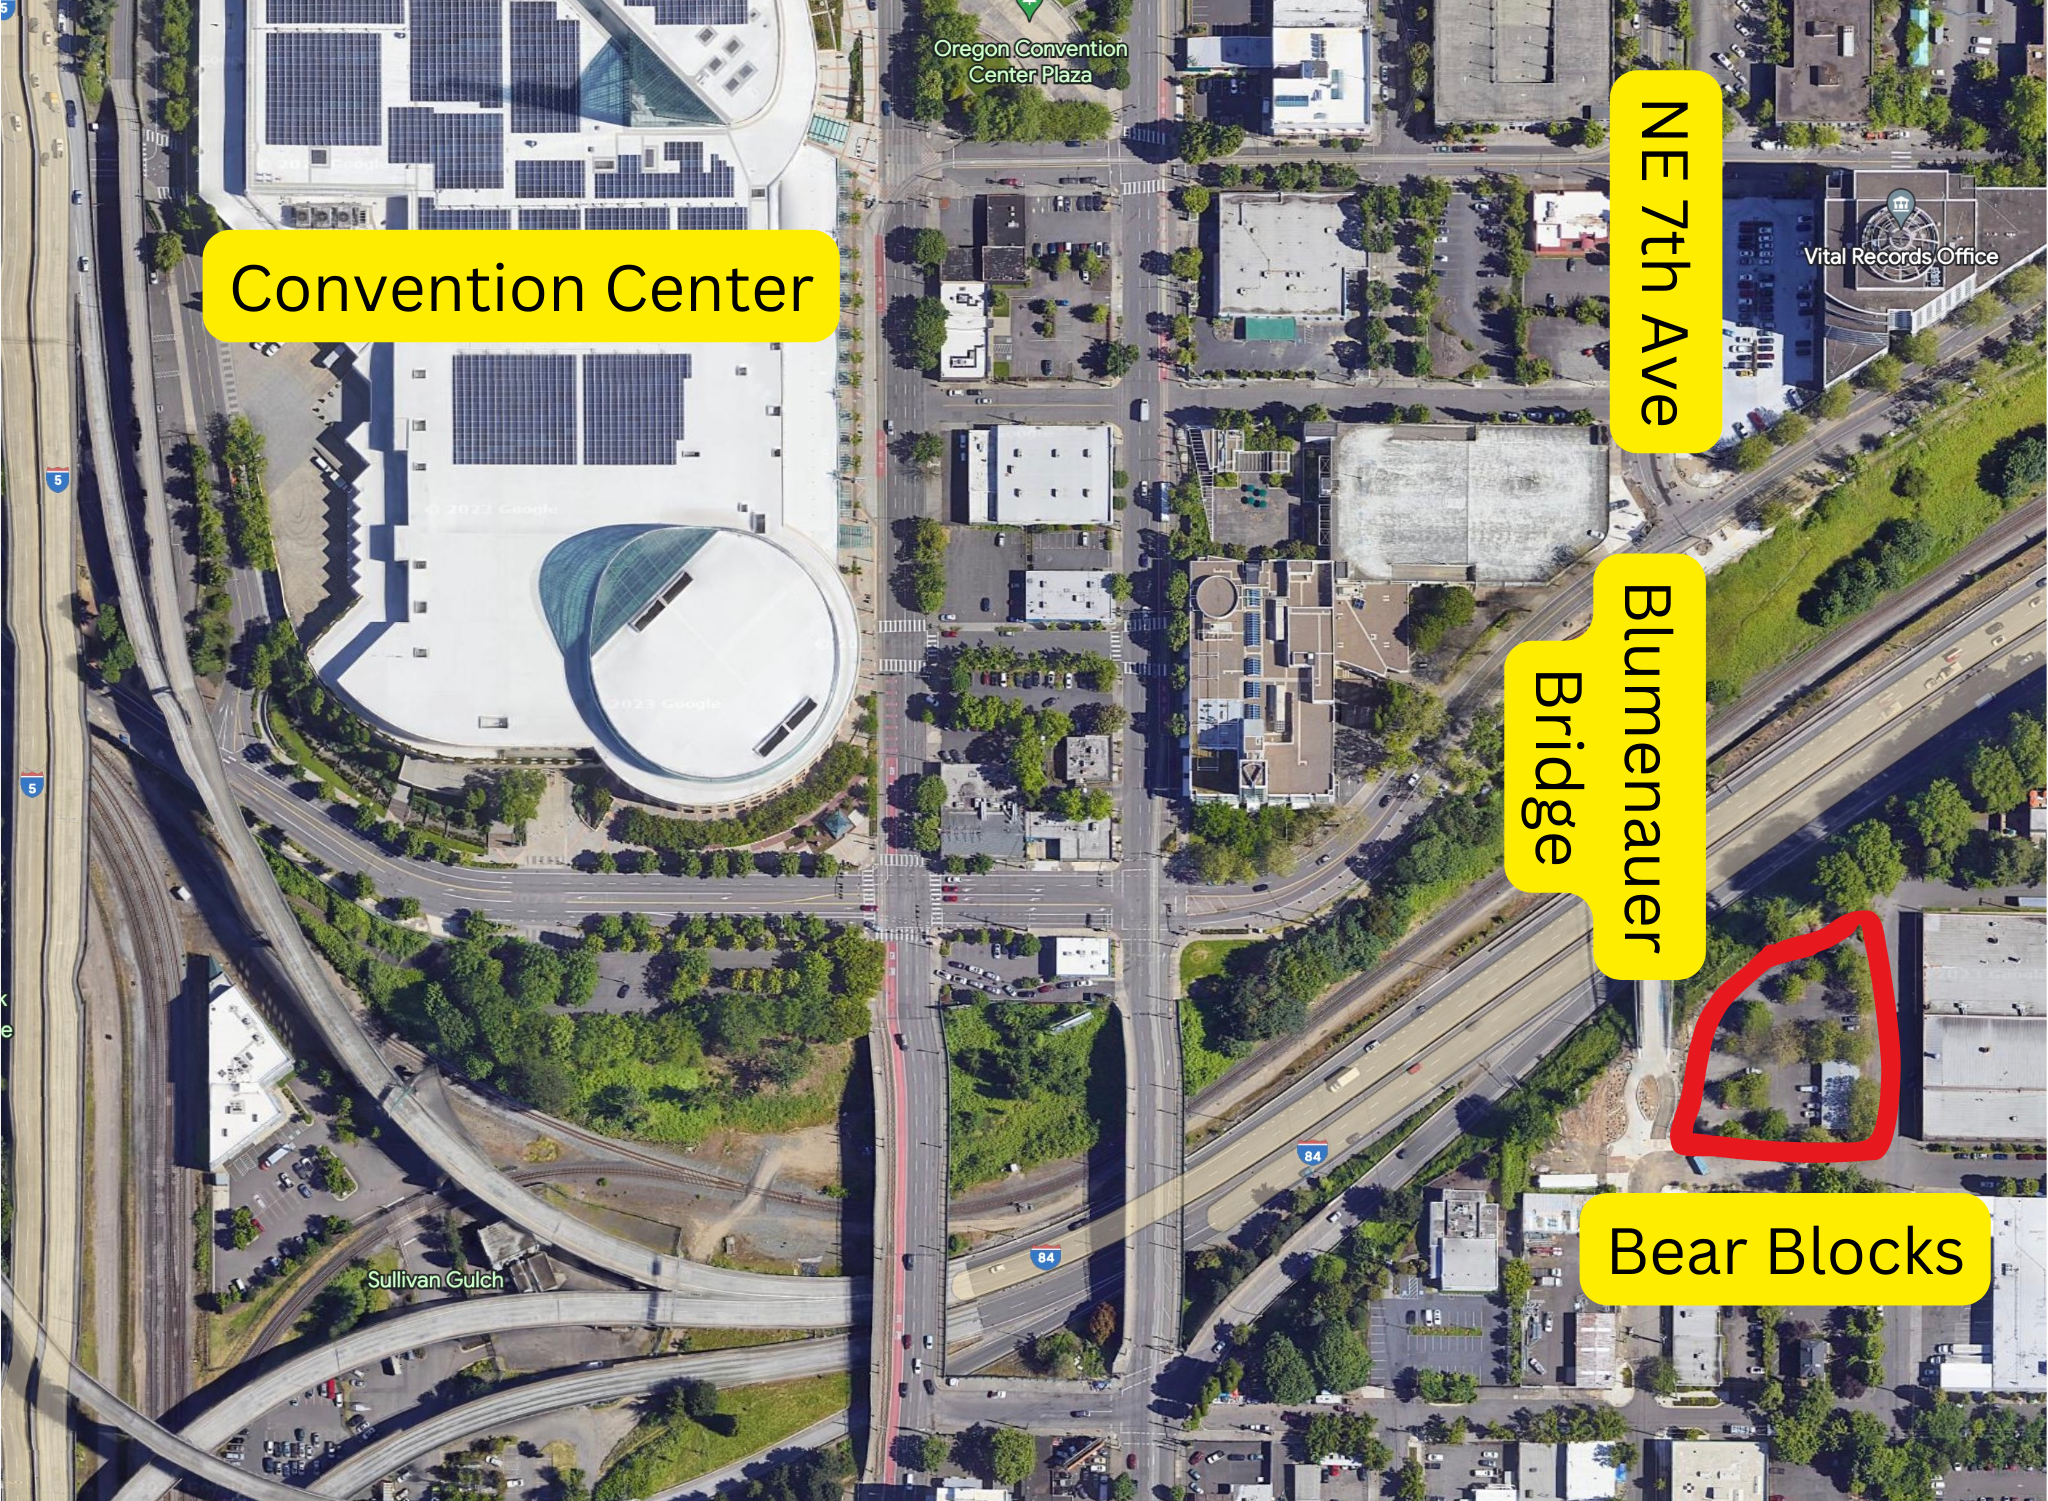 Parking and Directions  Oregon Convention Center